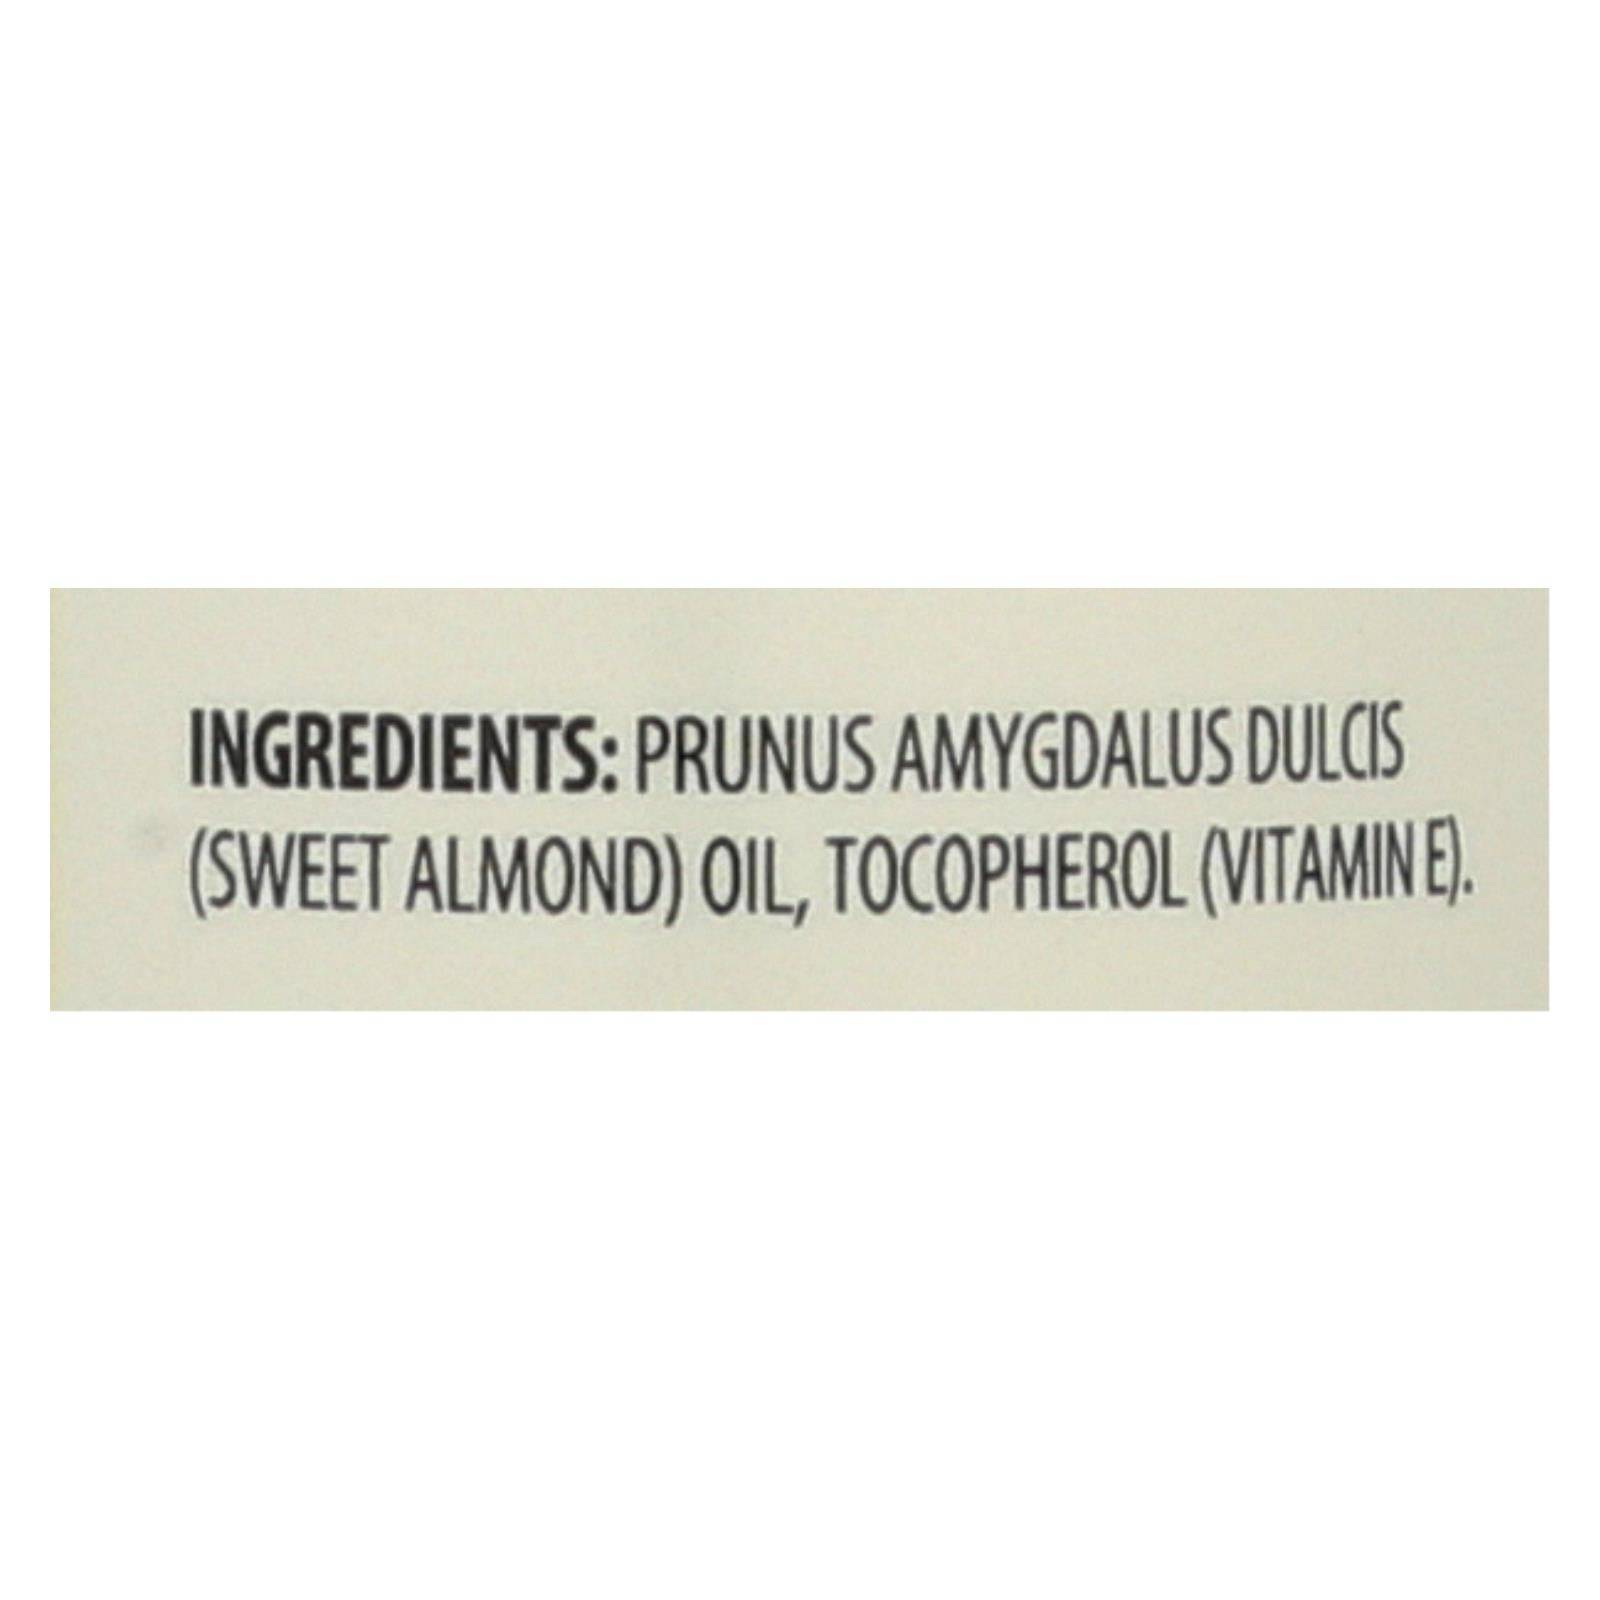 Buy Aura Cacia - Sweet Almond Natural Skin Care Oil - 4 Fl Oz  at OnlyNaturals.us